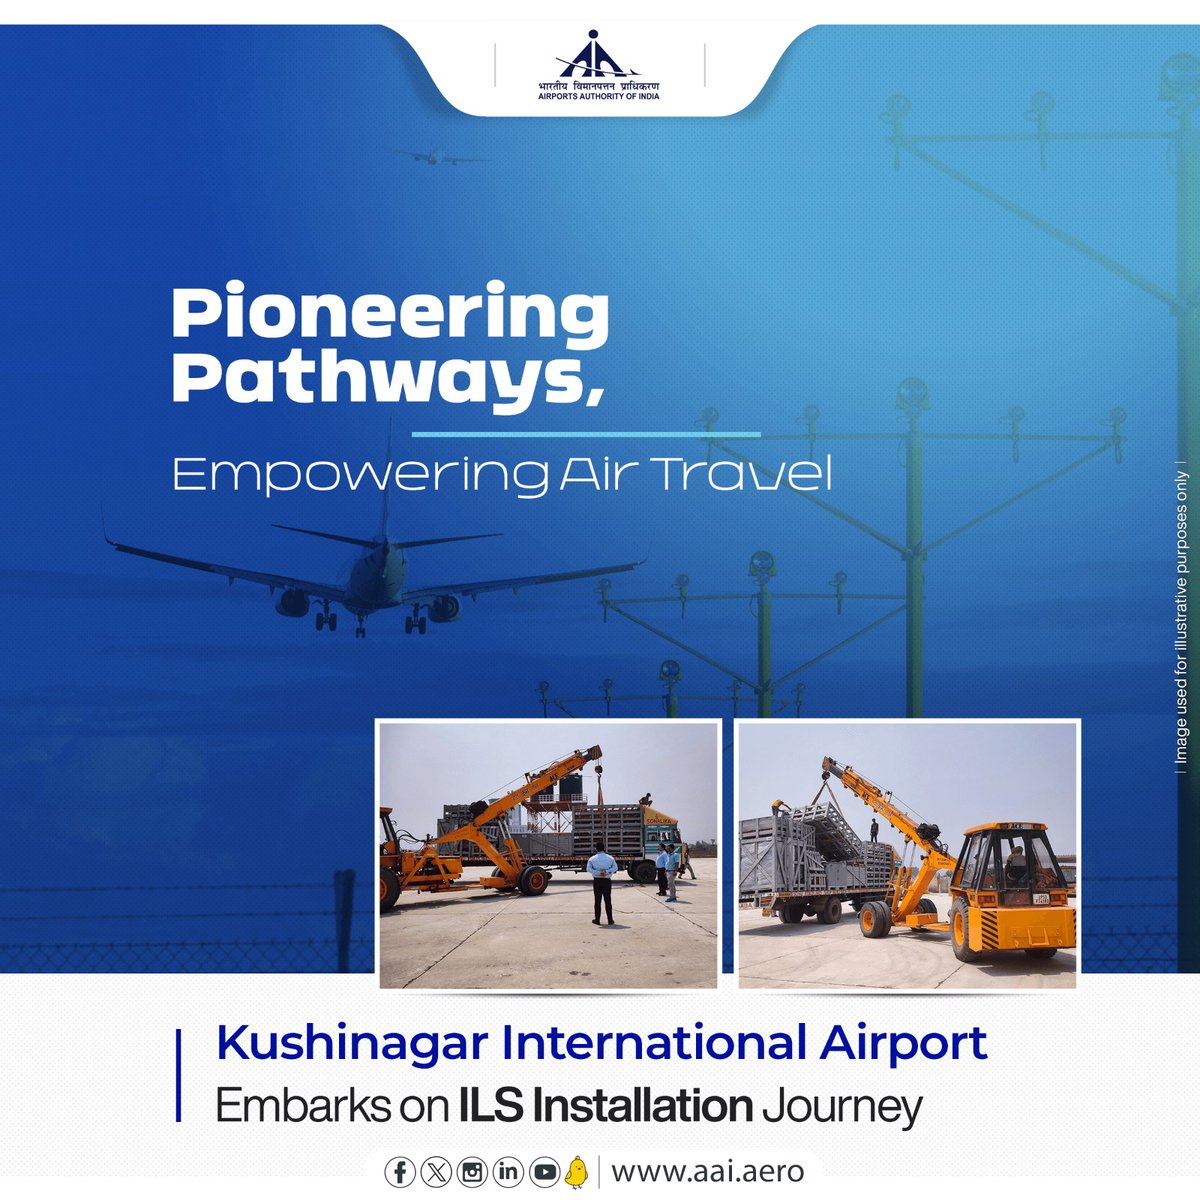 At #AAI’s #Kushinagar @aaikushiairport, a pivotal moment unfolded as the long-awaited and cutting-edge #ILS Equipment recently arrived at the airport. Soon, with the installation of this (RTS -734, CAT-I) equipment, the airport will witness a new era of advanced aviation…